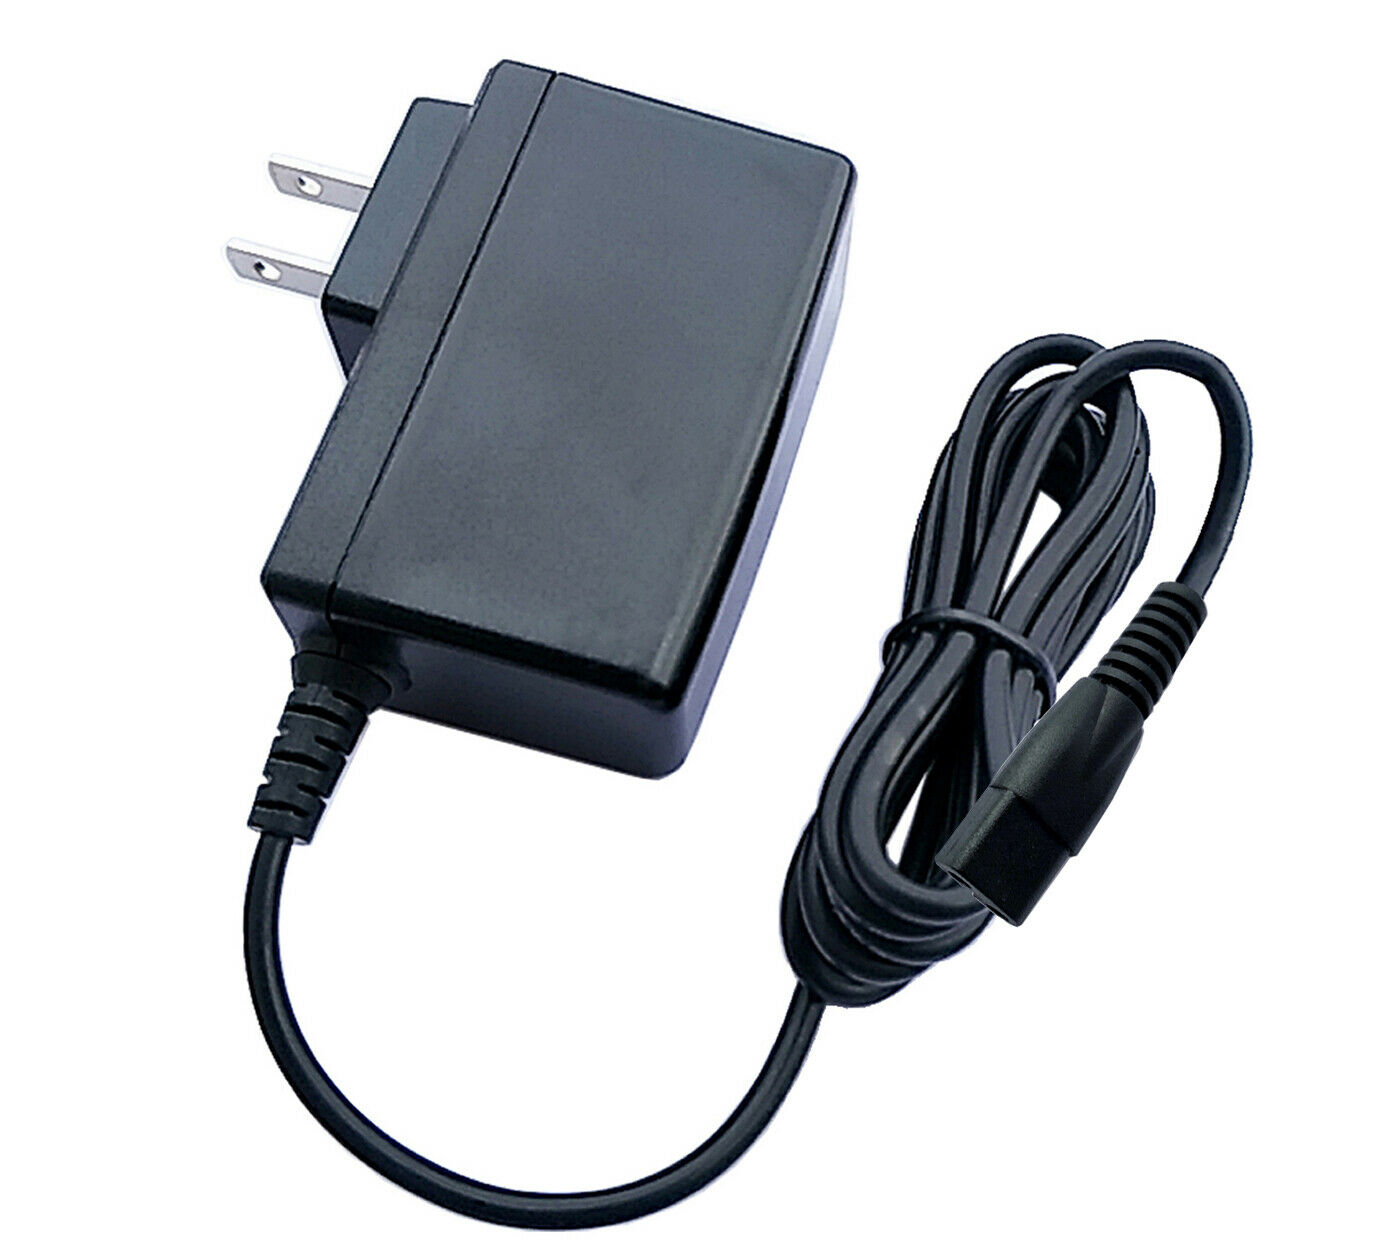 Globe AC/DC Adapter For HON-KWANG D9300-04 D930004 Power Supply Battery Charger Technical Specifications: 1 AC input vo